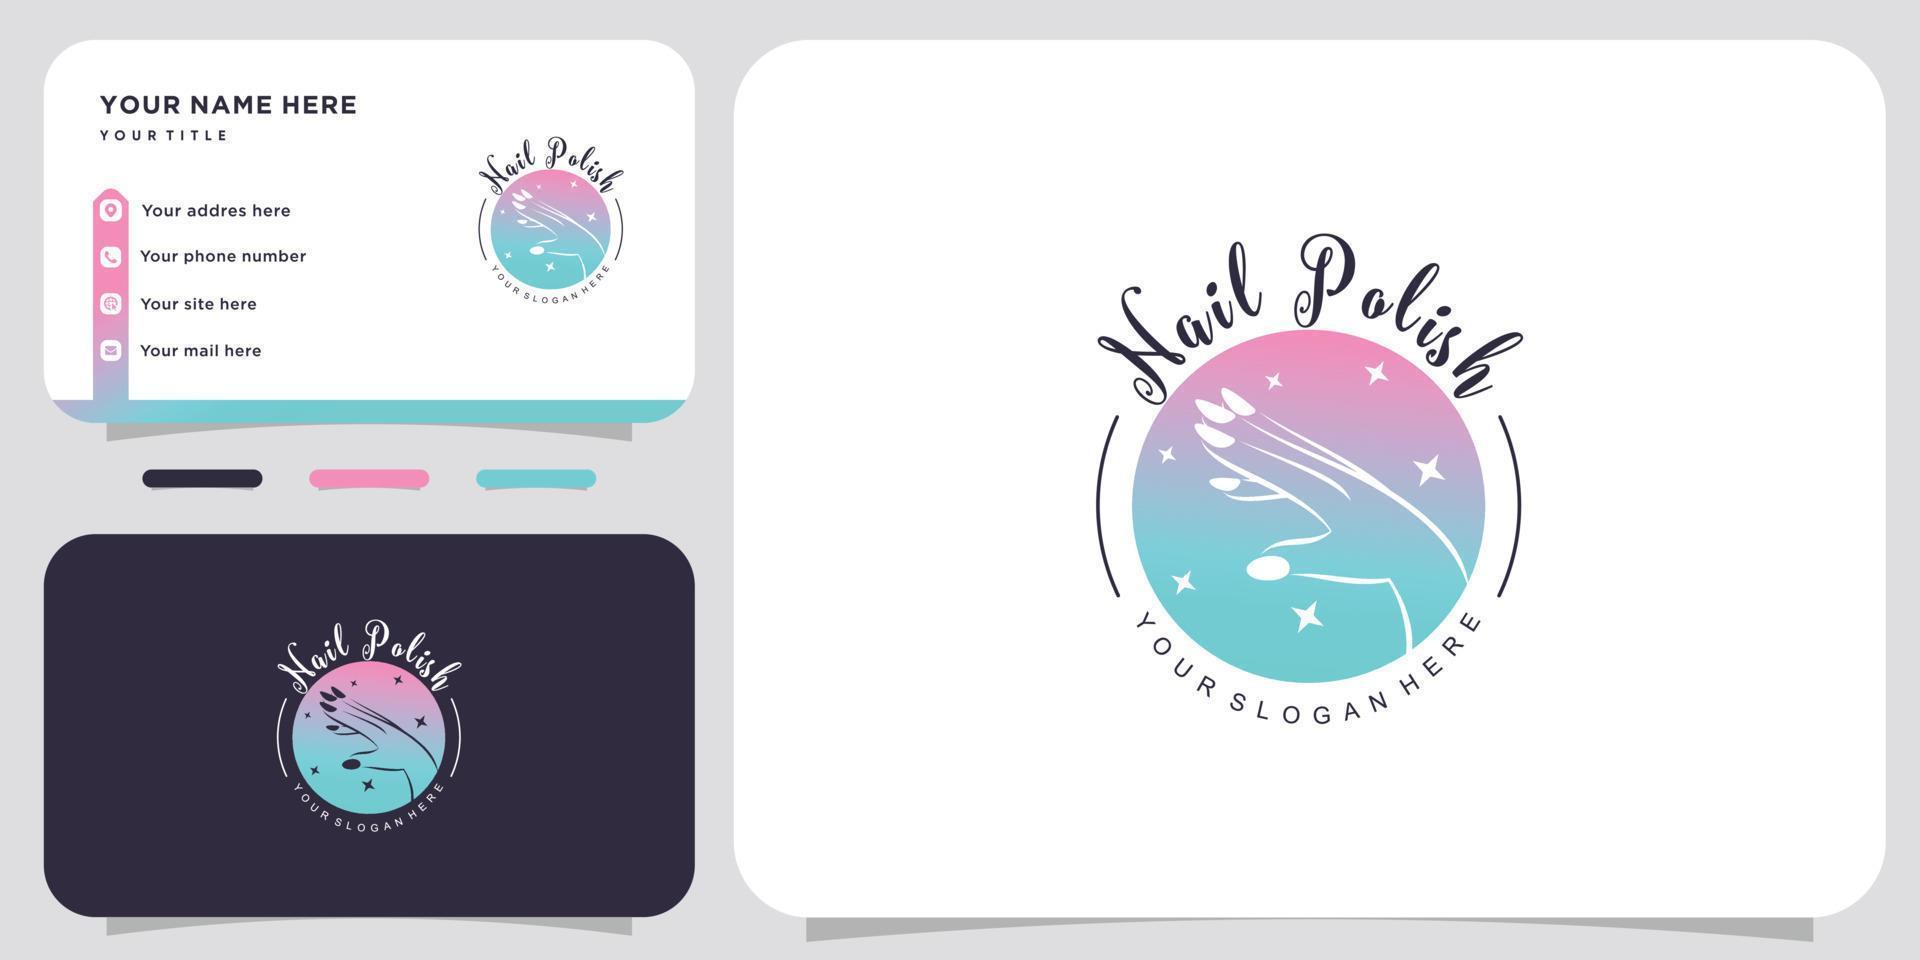 Nail polish or nail logo design with creative concept and business card design Premium Vector